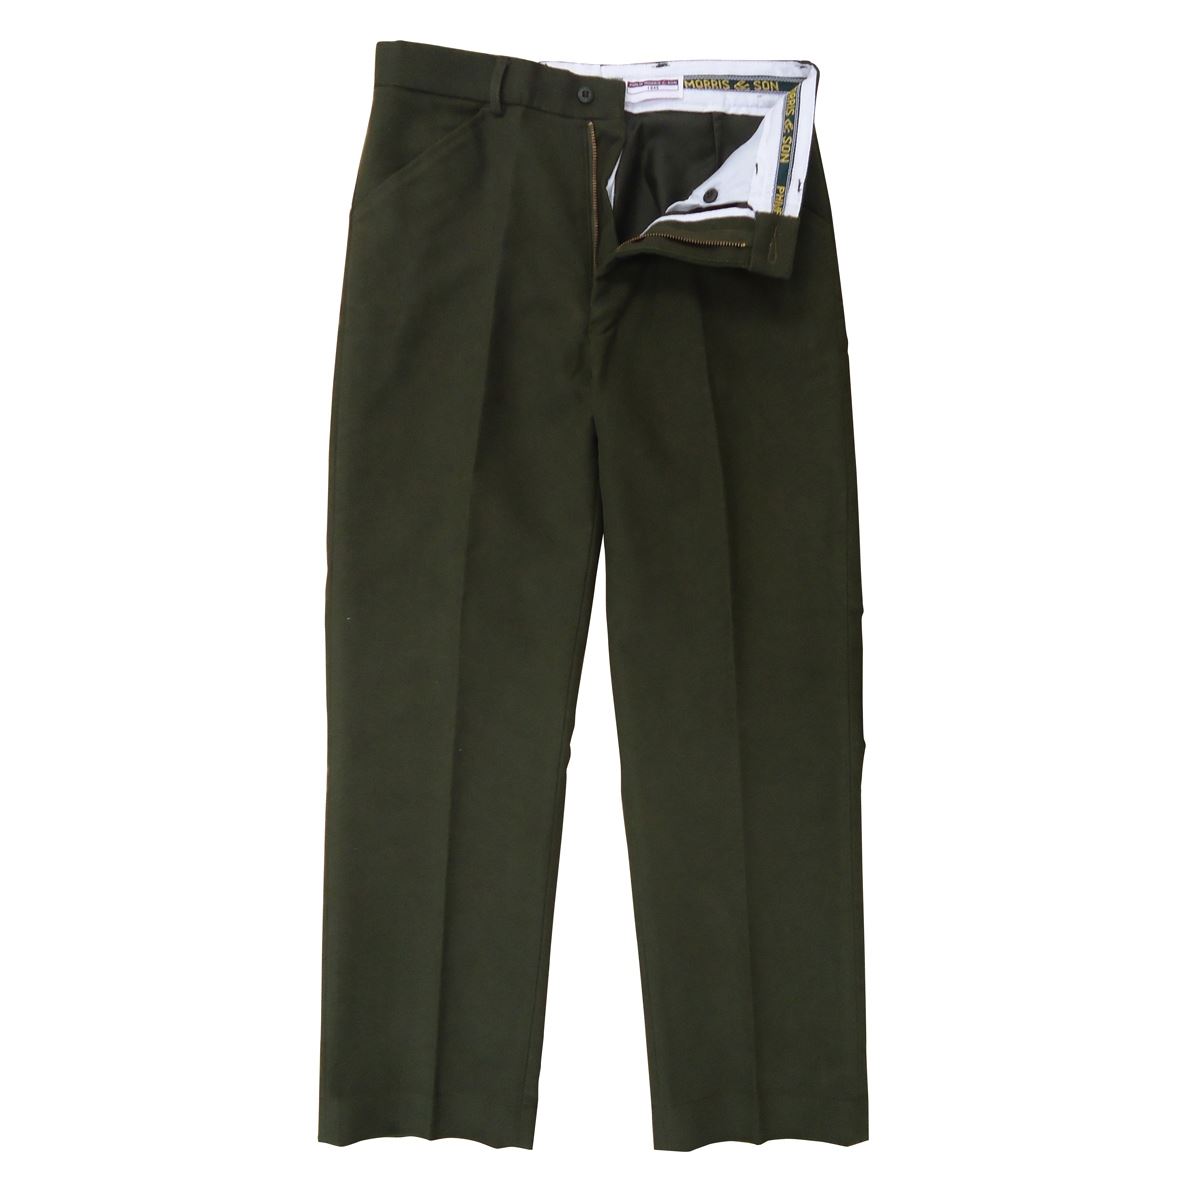 What are the characteristics of the Heritage 1845 mens moleskin trousers by Philip Morris & Son?